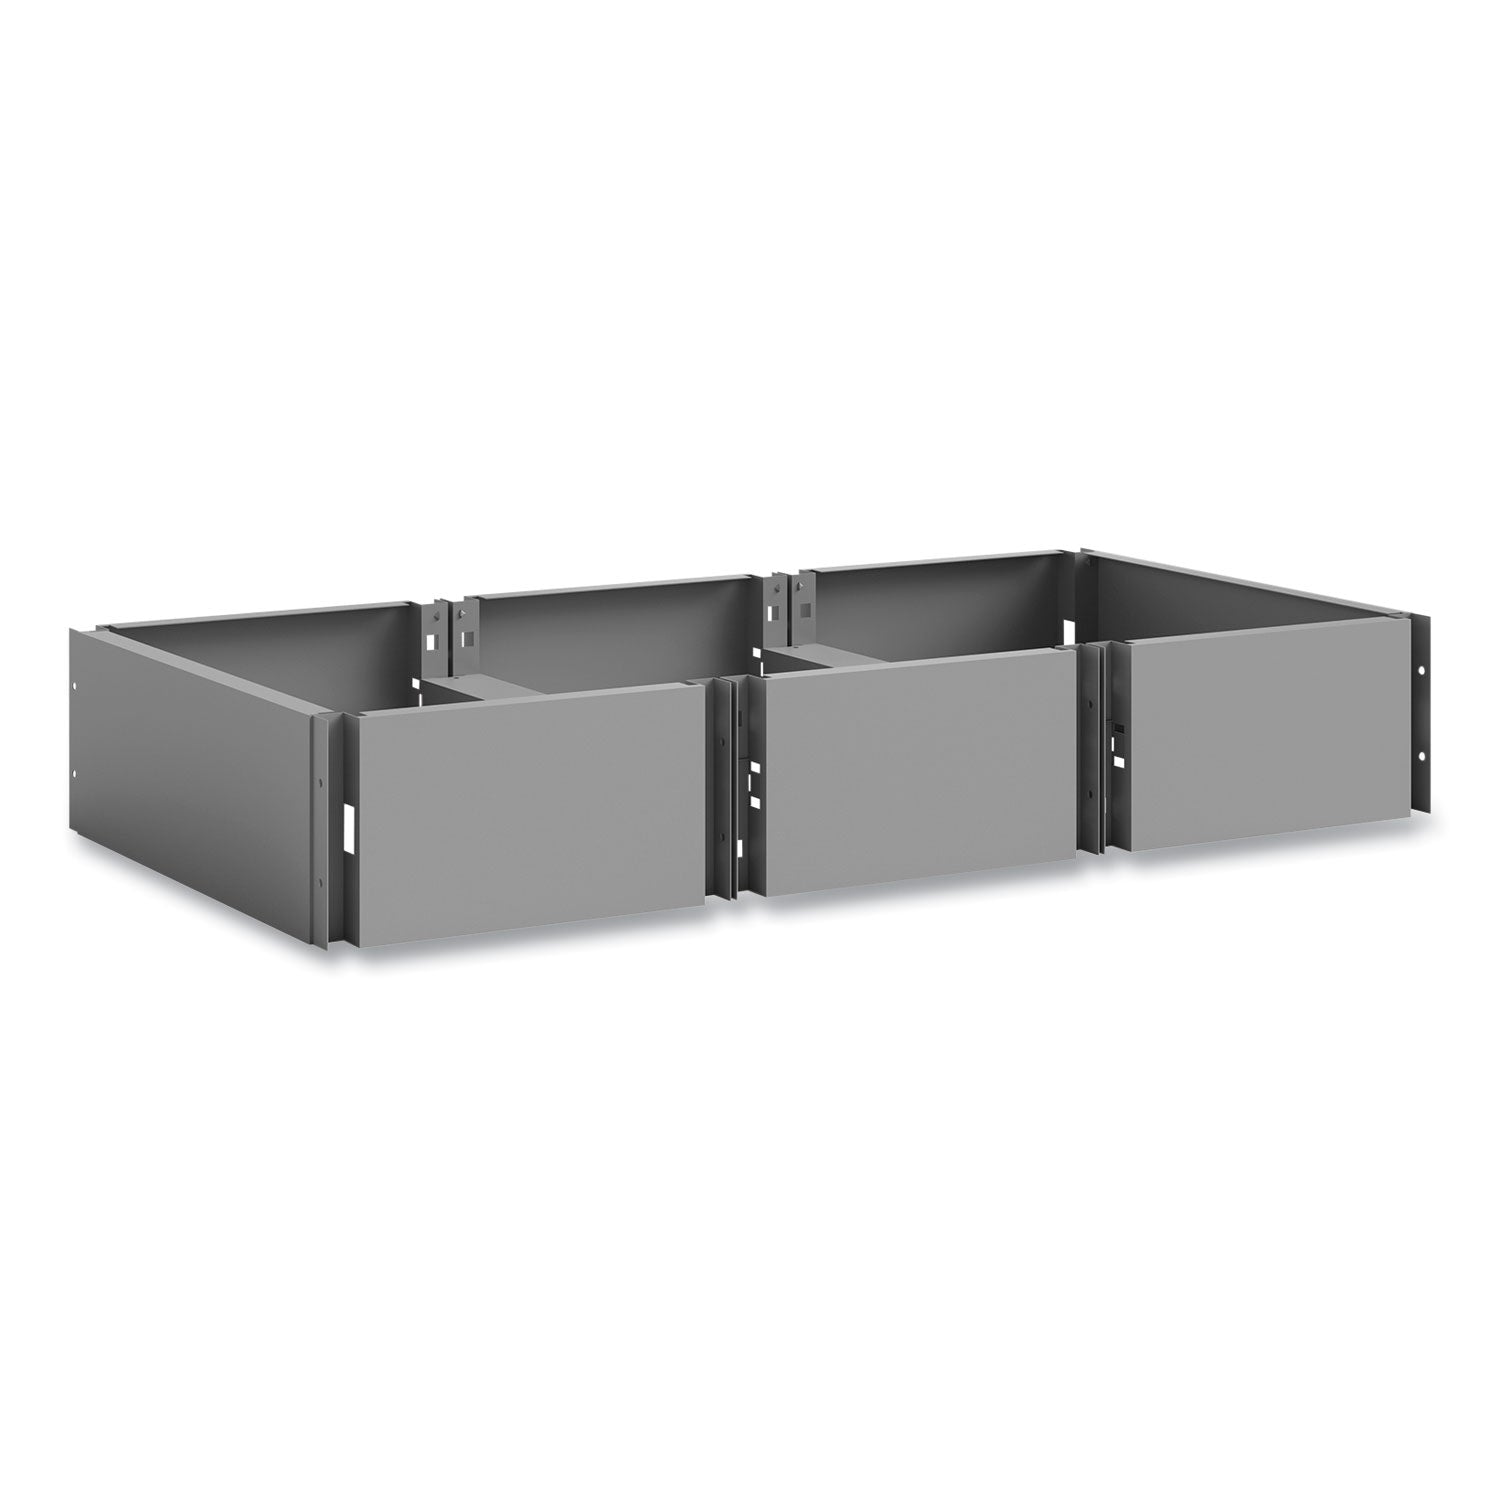 triple-continuous-metal-locker-base-addition-35w-x-16d-x-575h-gray-ships-in-1-3-business-days_saf5520gr - 1